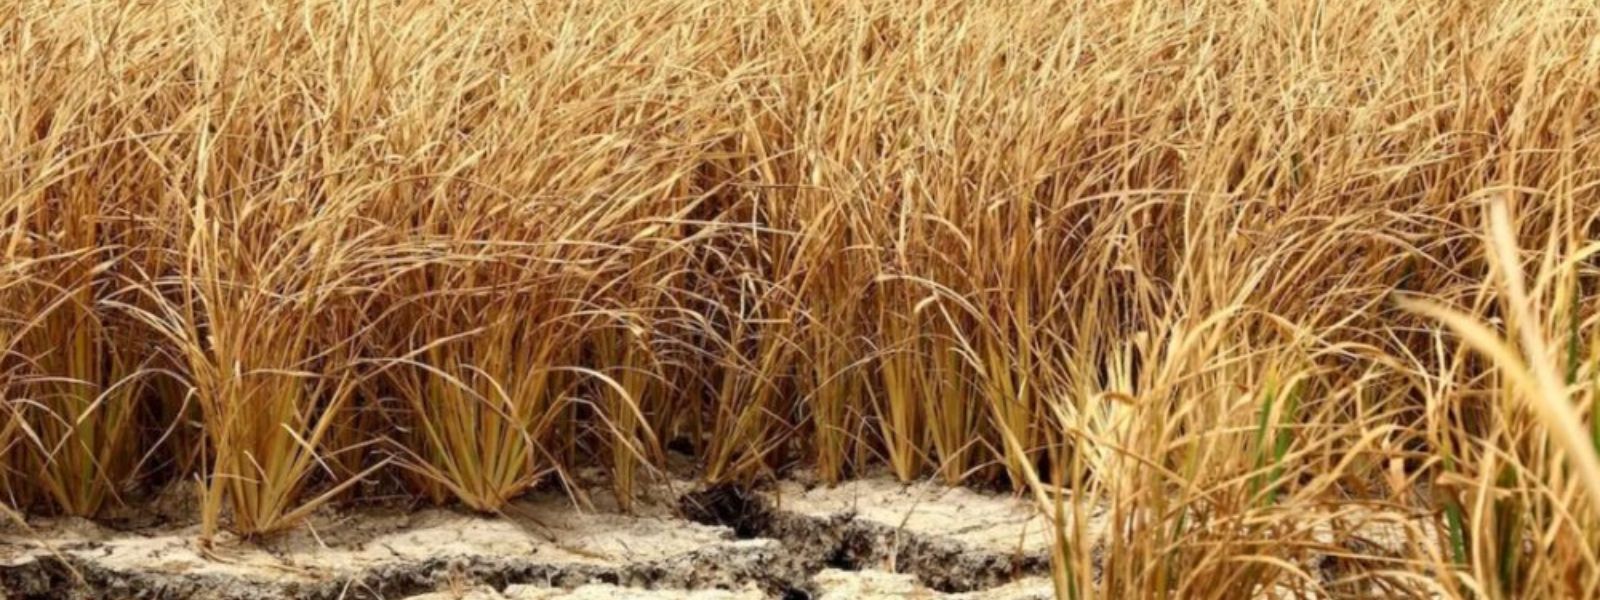 Crop damage due to dry spell exceeds 60,000 acres